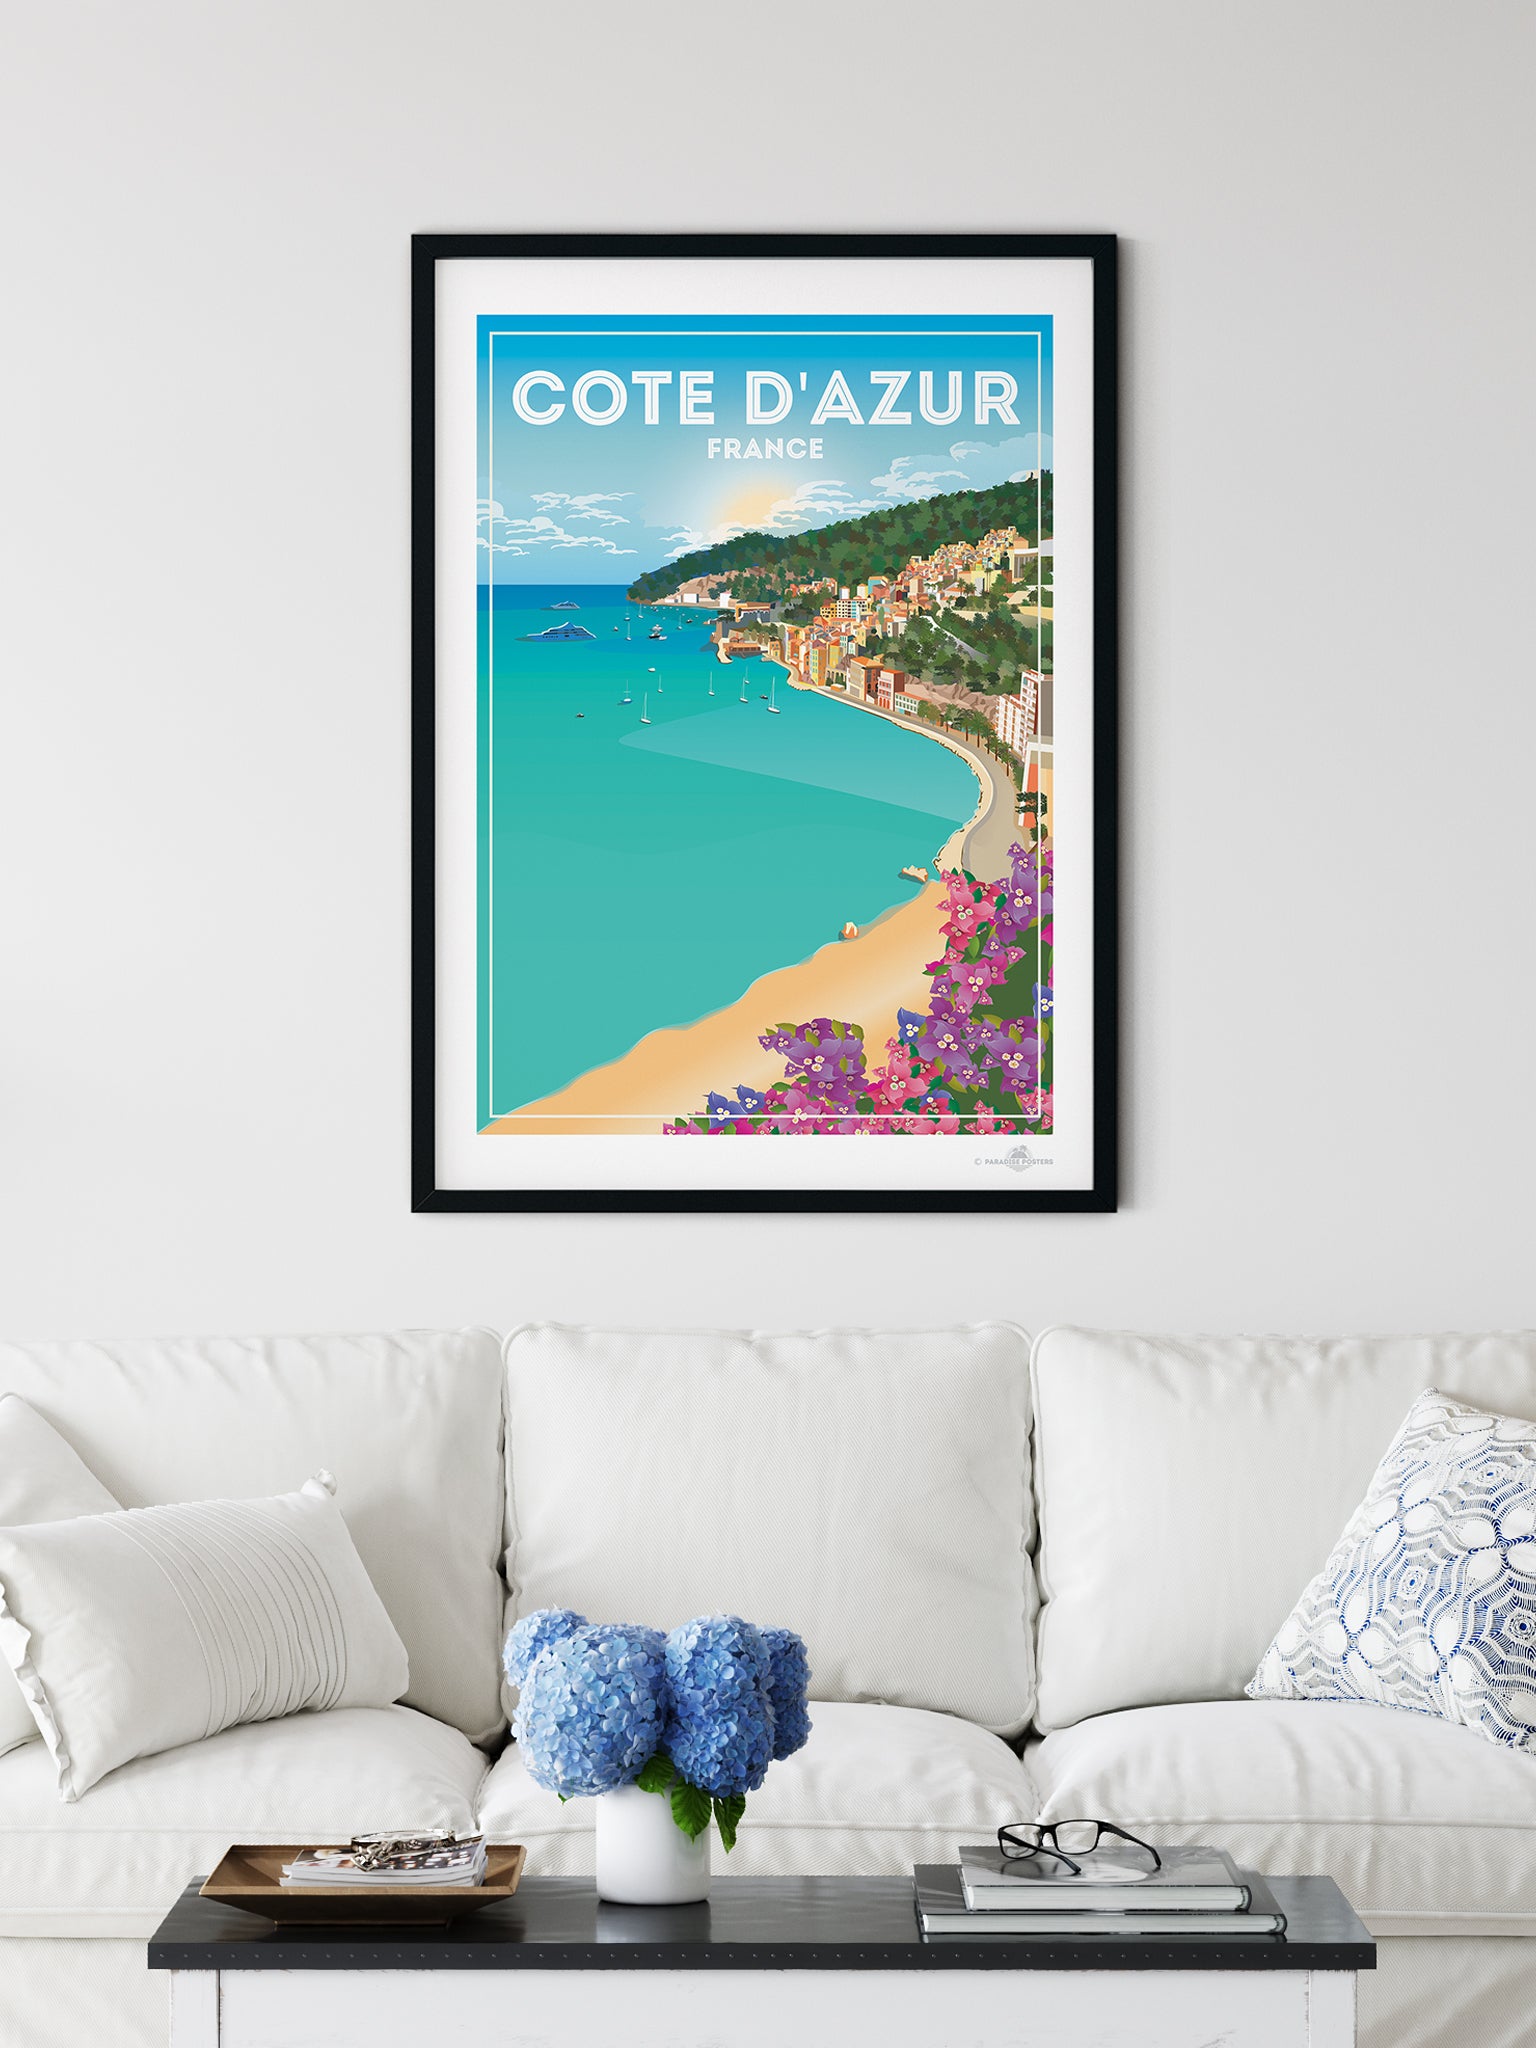 Explore France Through Stunning Travel Posters – Paradise Posters